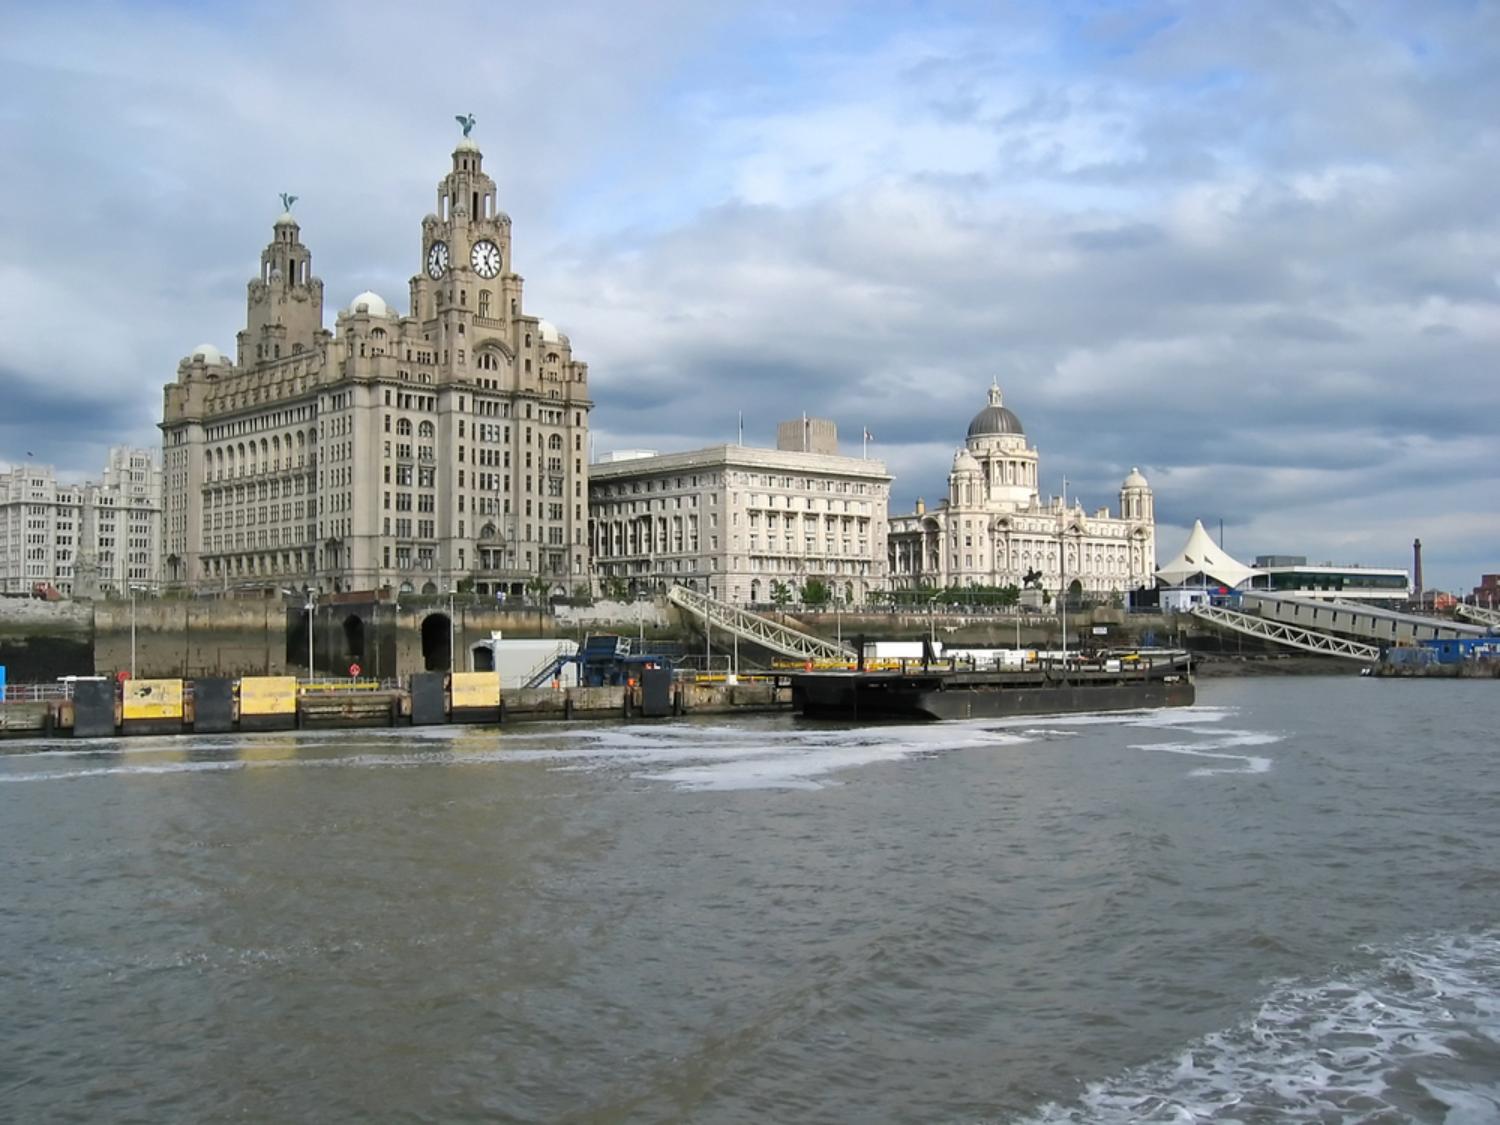 Beatles tour in Liverpool : Tour the city at your own leisure from London by train